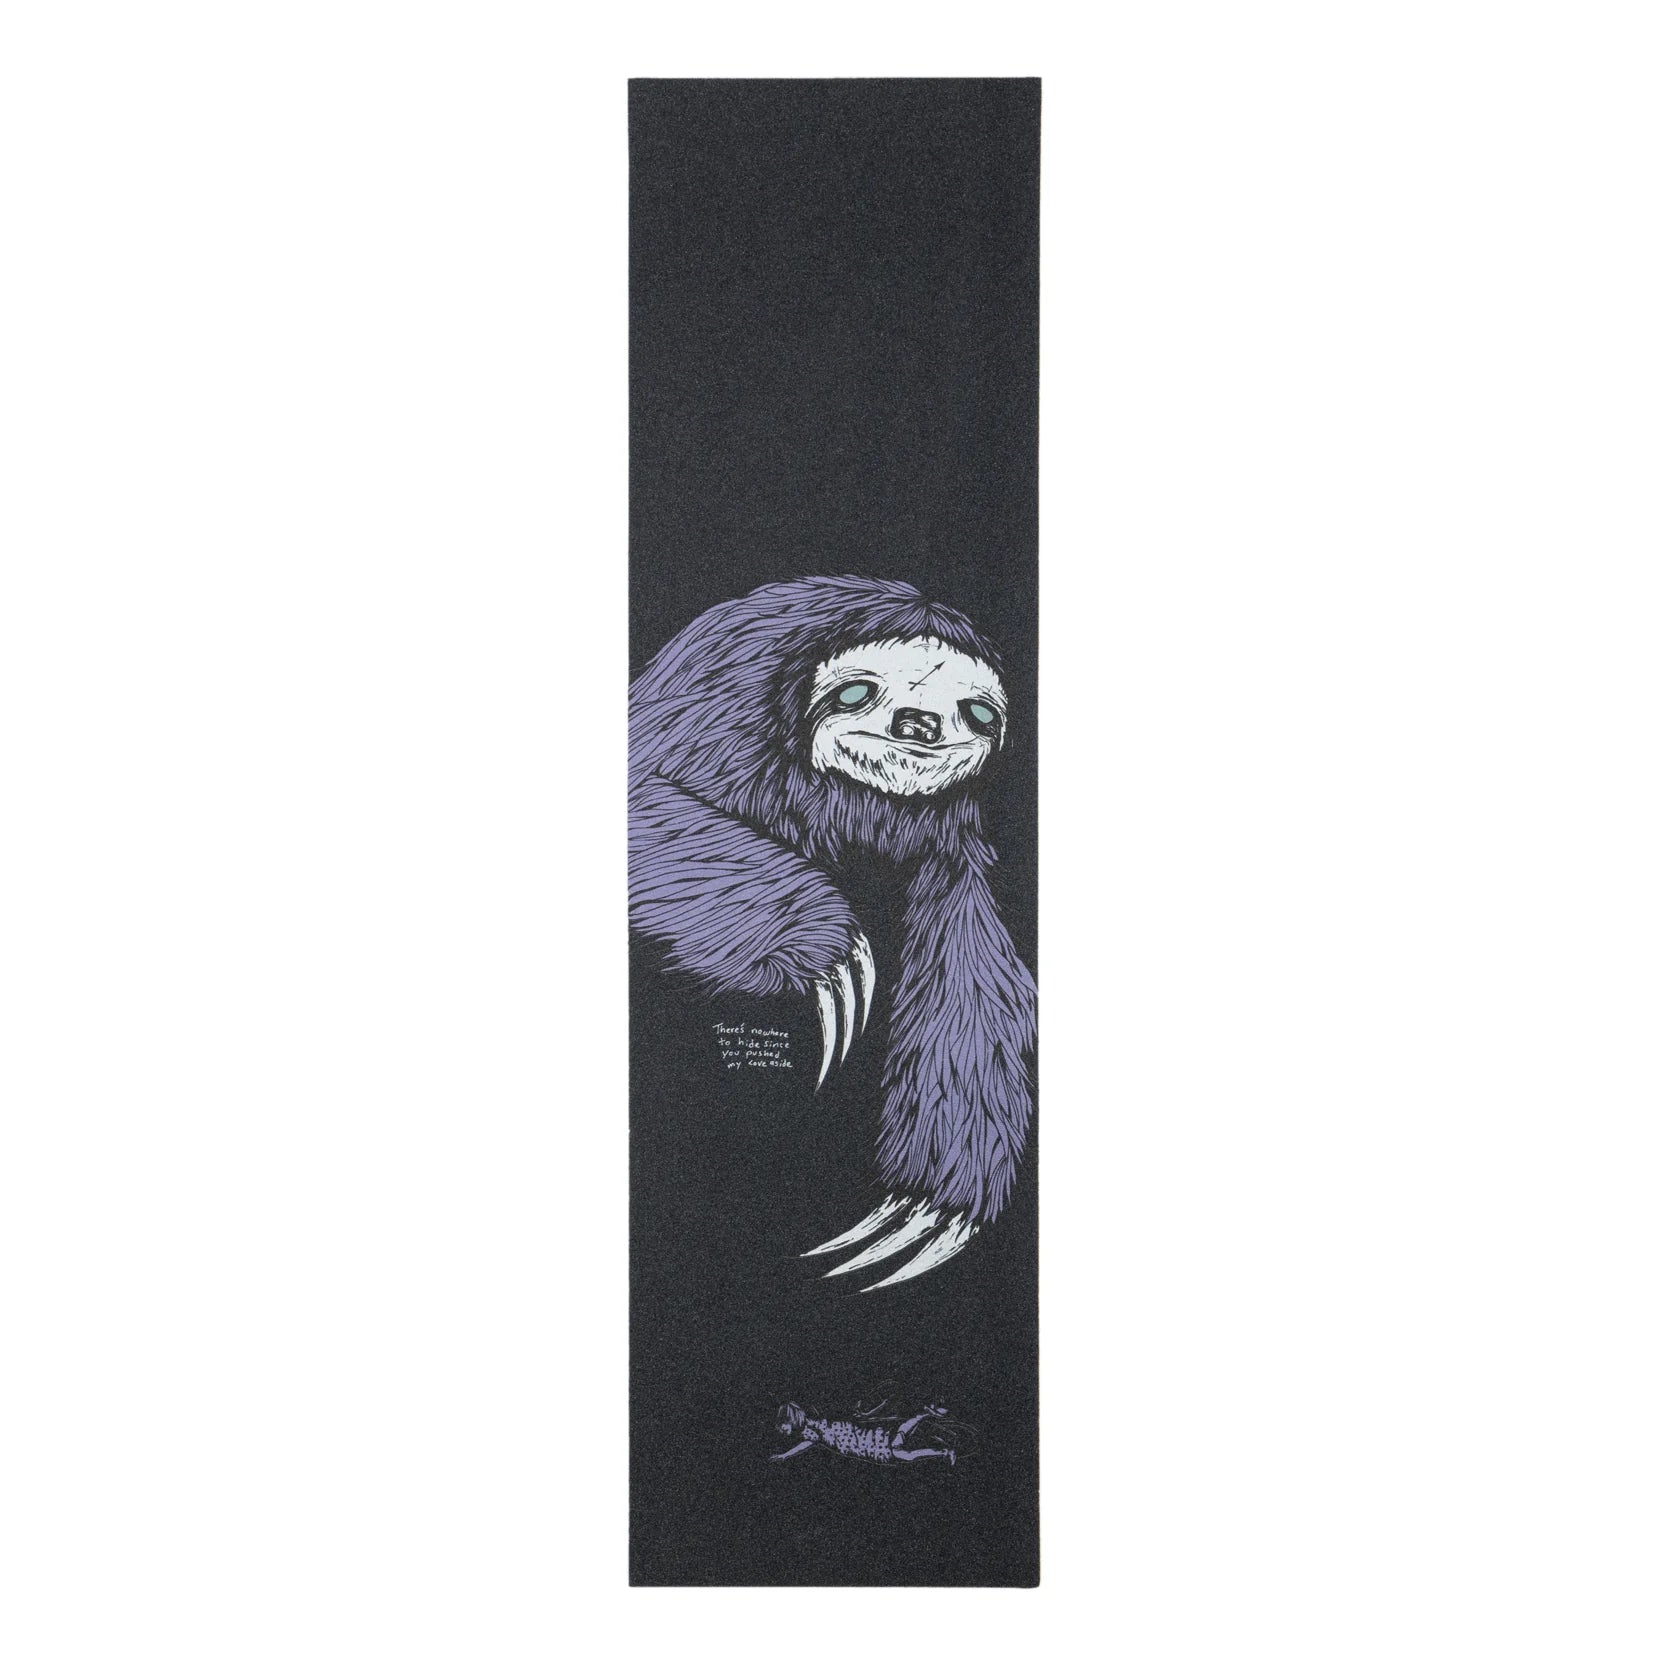 WELCOME Sloth Skateboard Grip Tape Griptape Welcome 